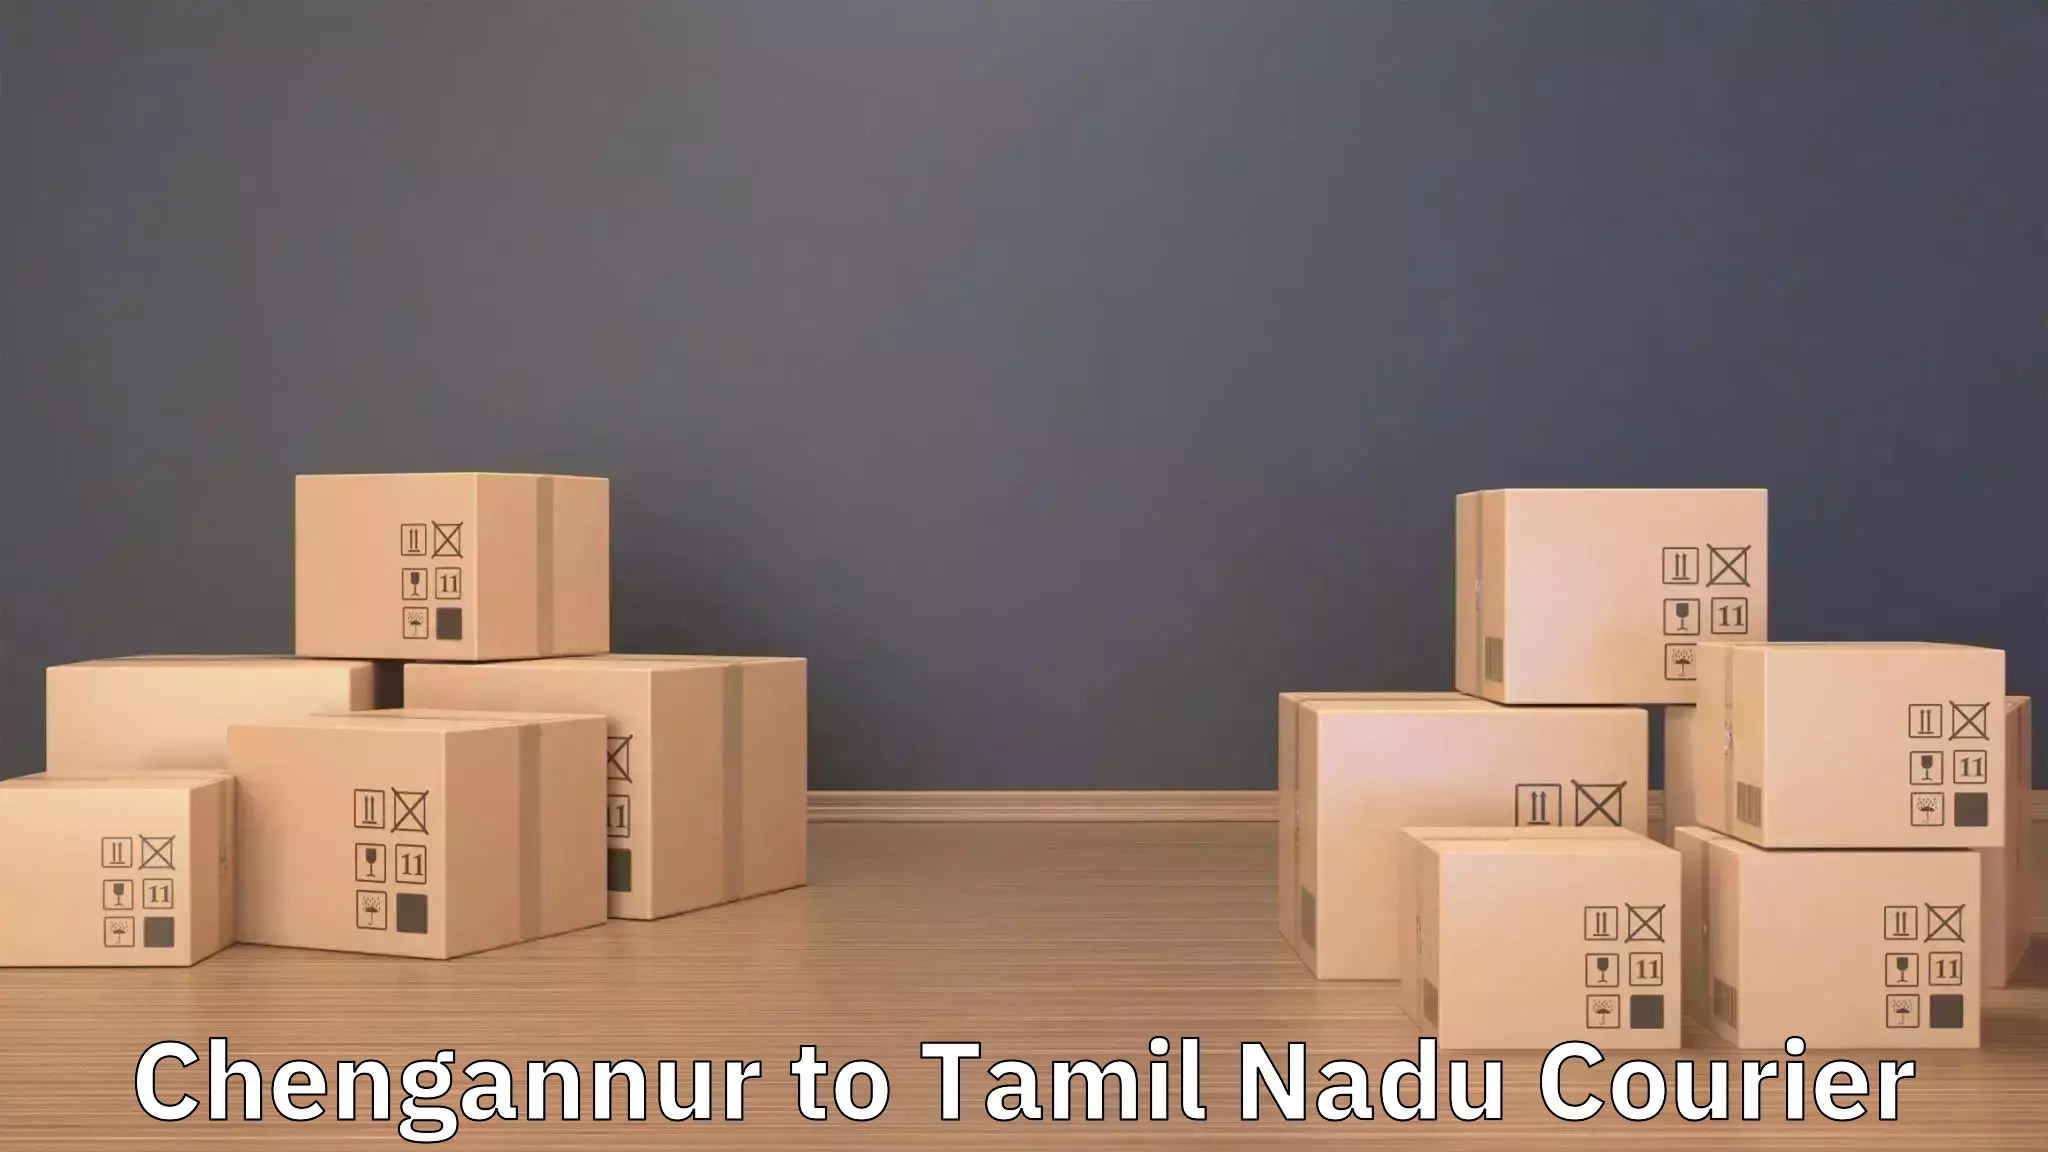 Professional packing services in Chengannur to Nagapattinam